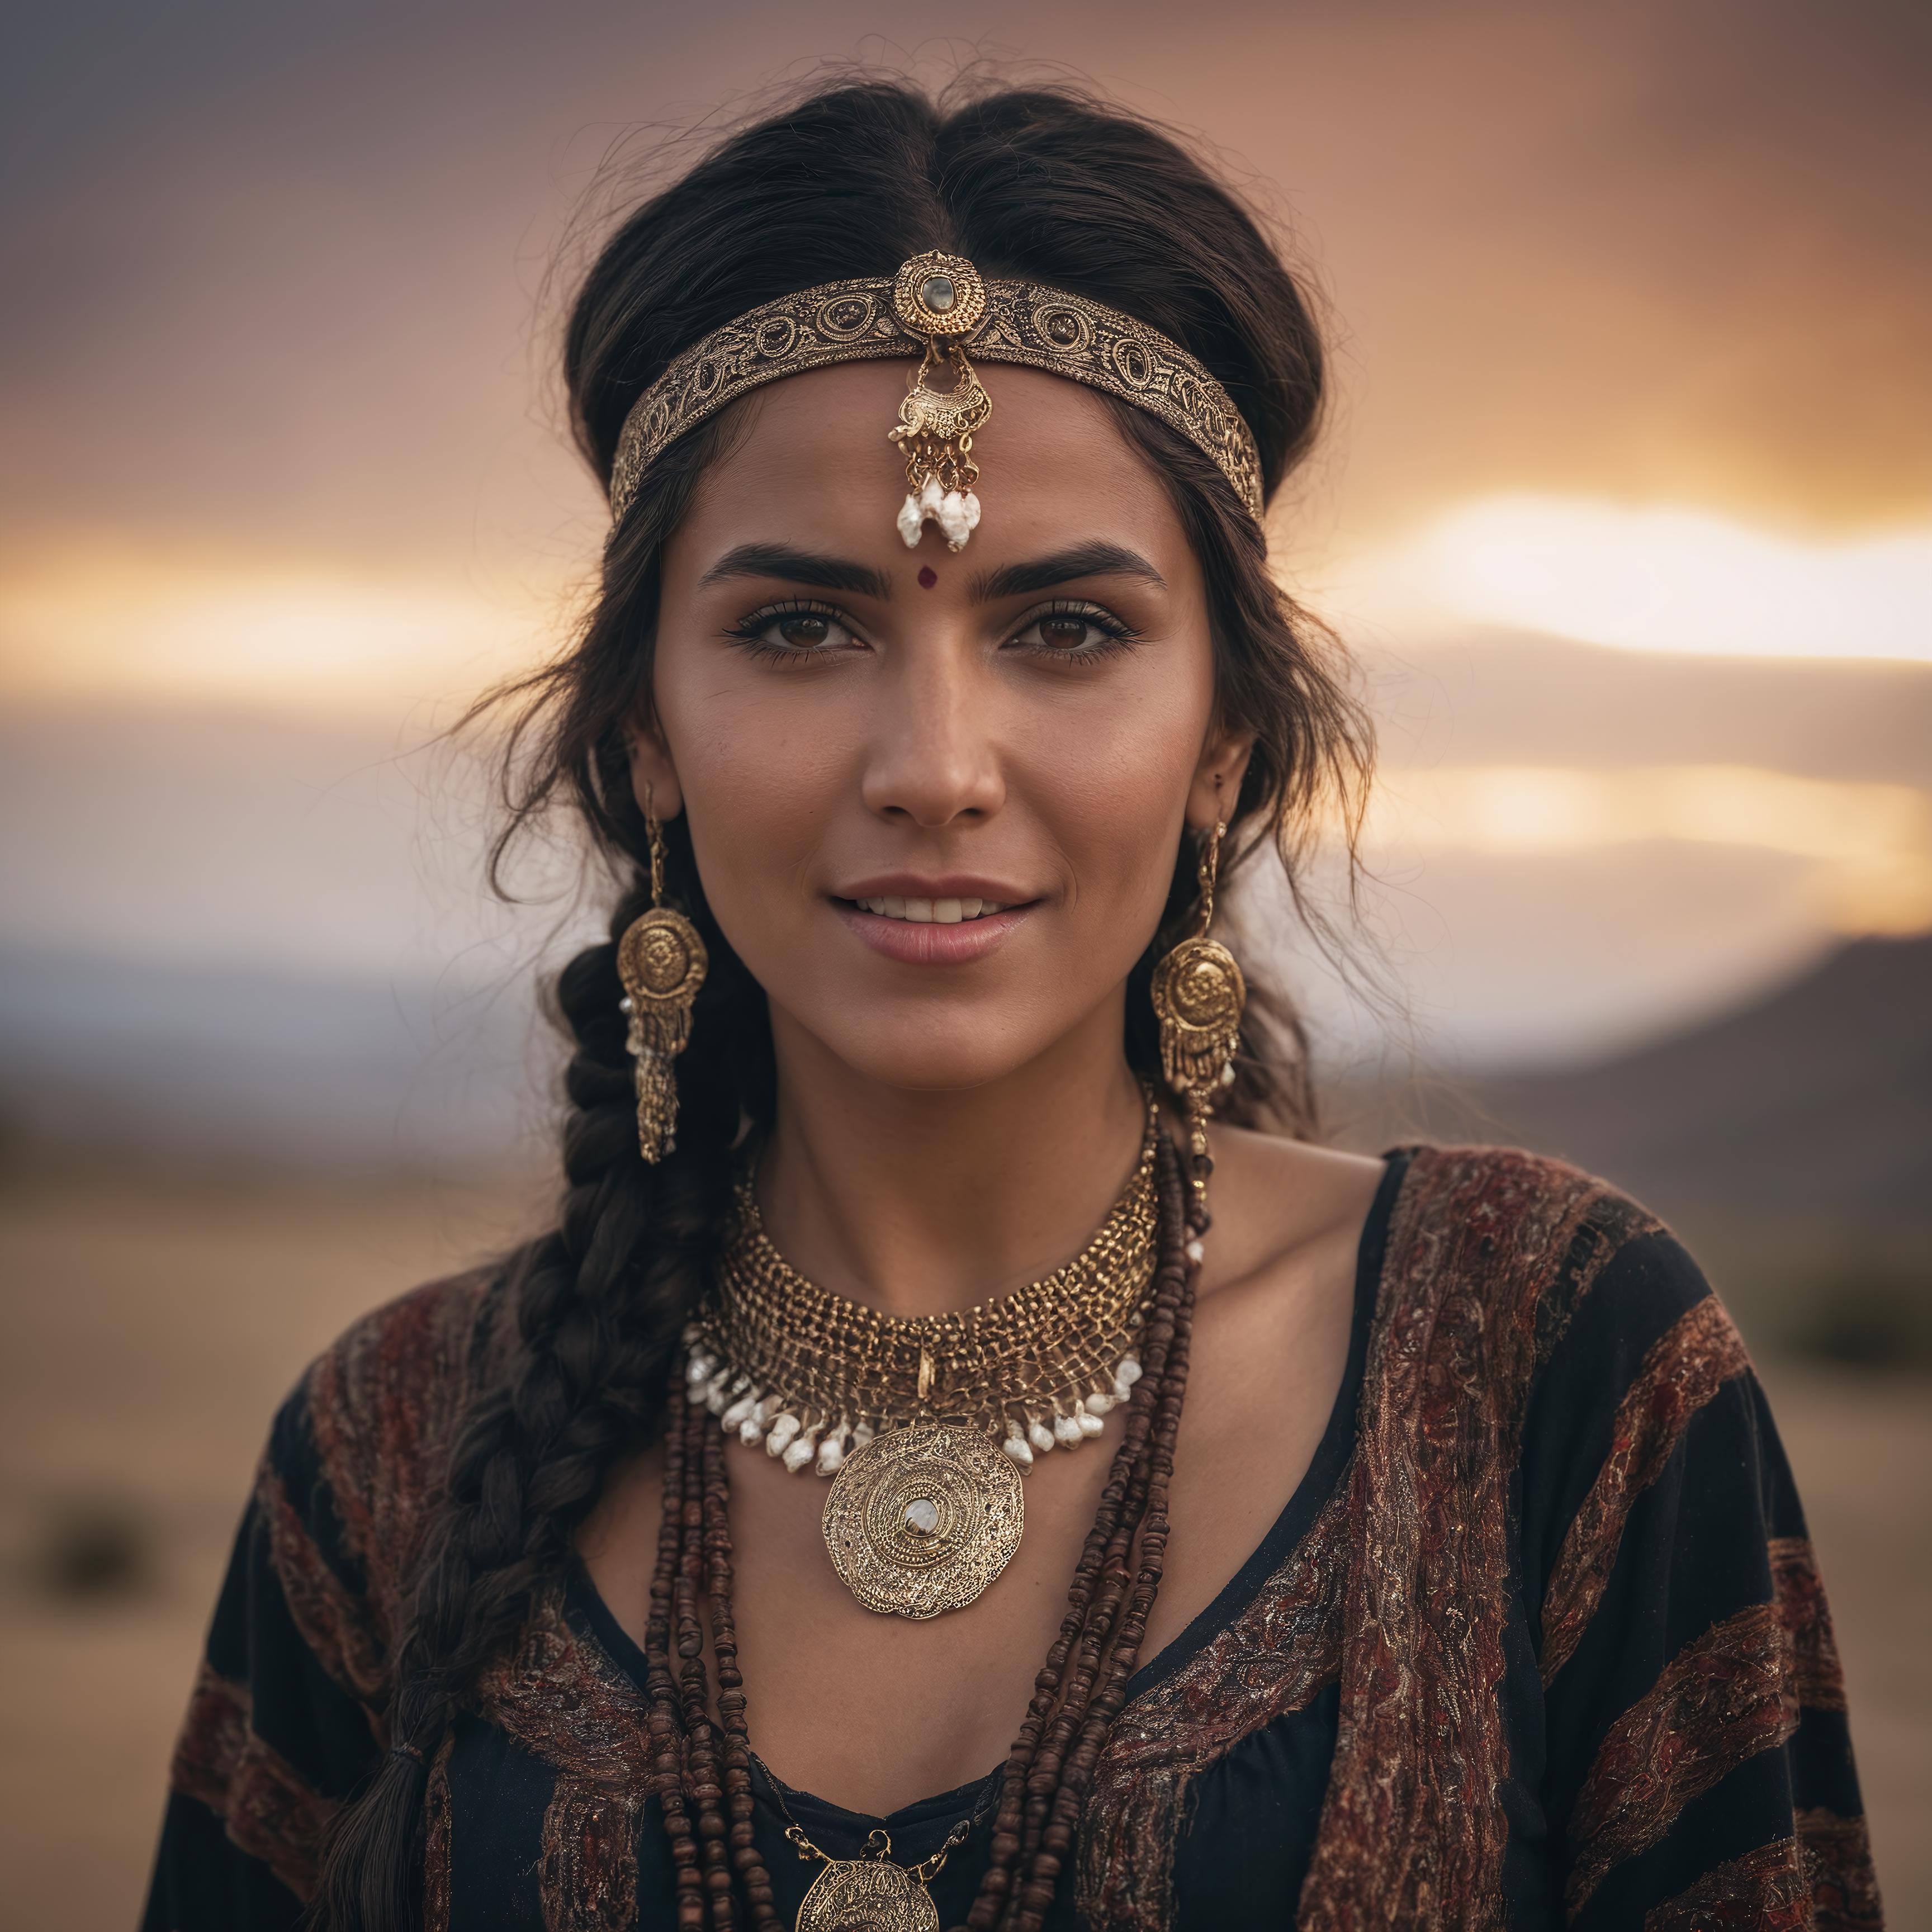 A Woman with a Headband and Necklace Smiling at the Sunset